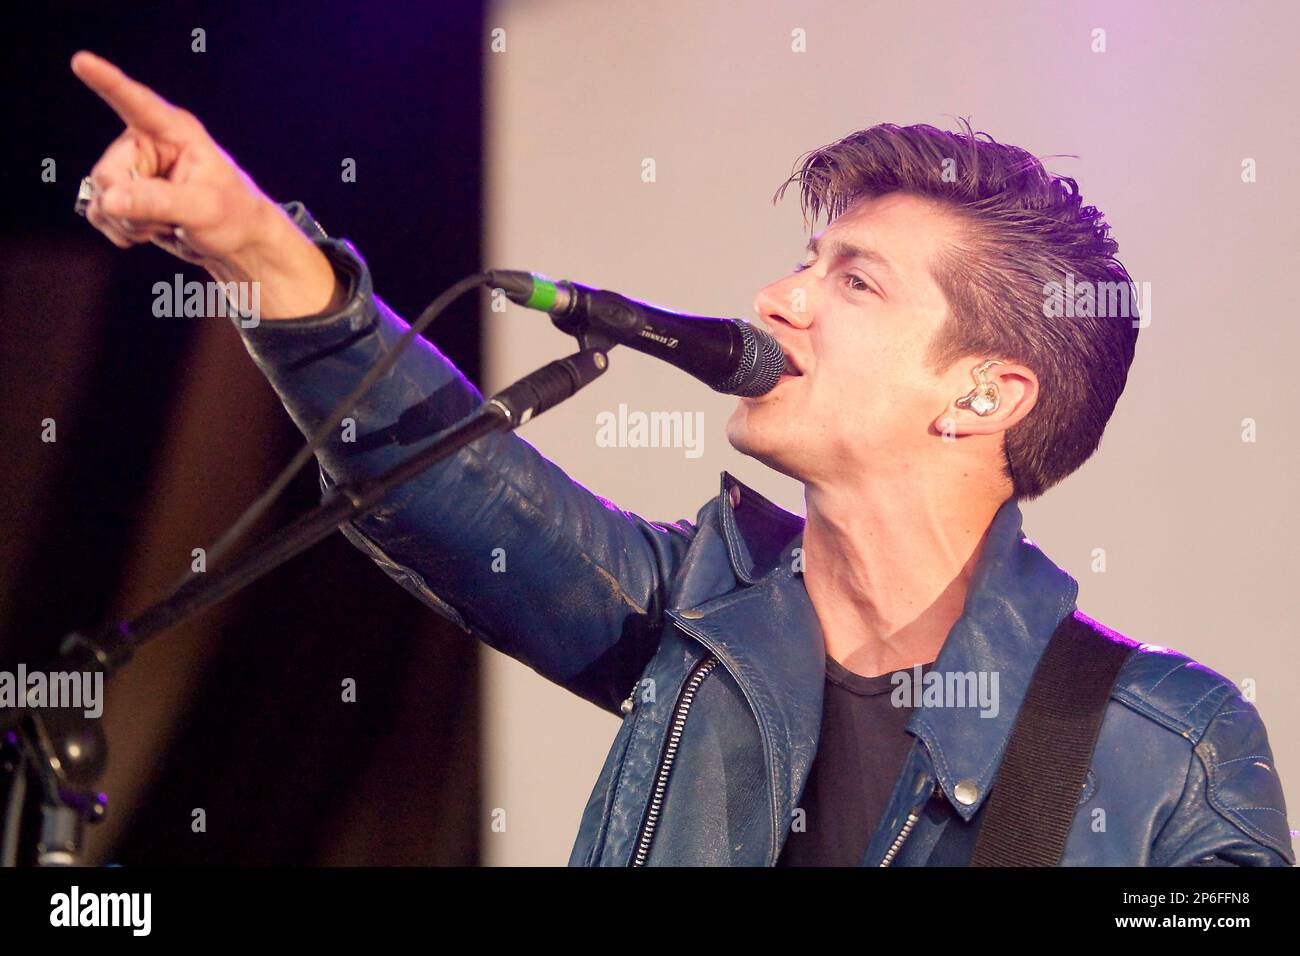 In this April 24, 2012, photo, Alex Turner of Arctic Monkeys performs at the Cynthia Woods Mitchell Pavilion in The Woodlands, Texas. (AP Photo/The Courier, Karl Anderson) Stock Photo